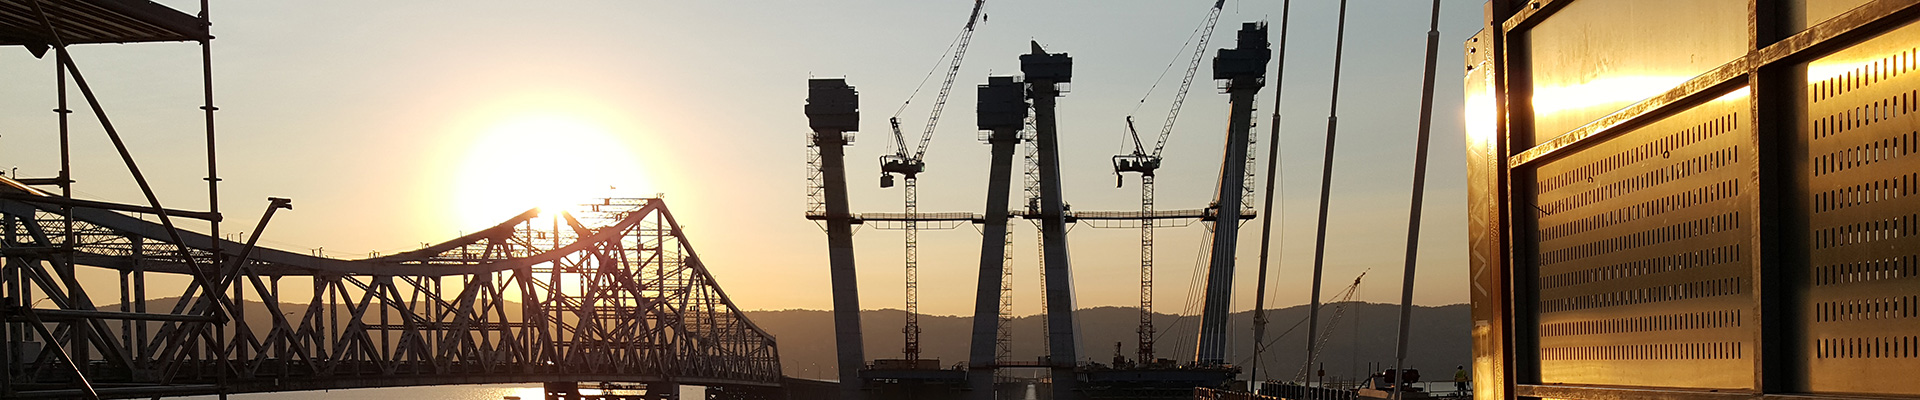 Scenic photo of a bridge and Naughton Energy equipment with the sunsetting in the background - Our Company